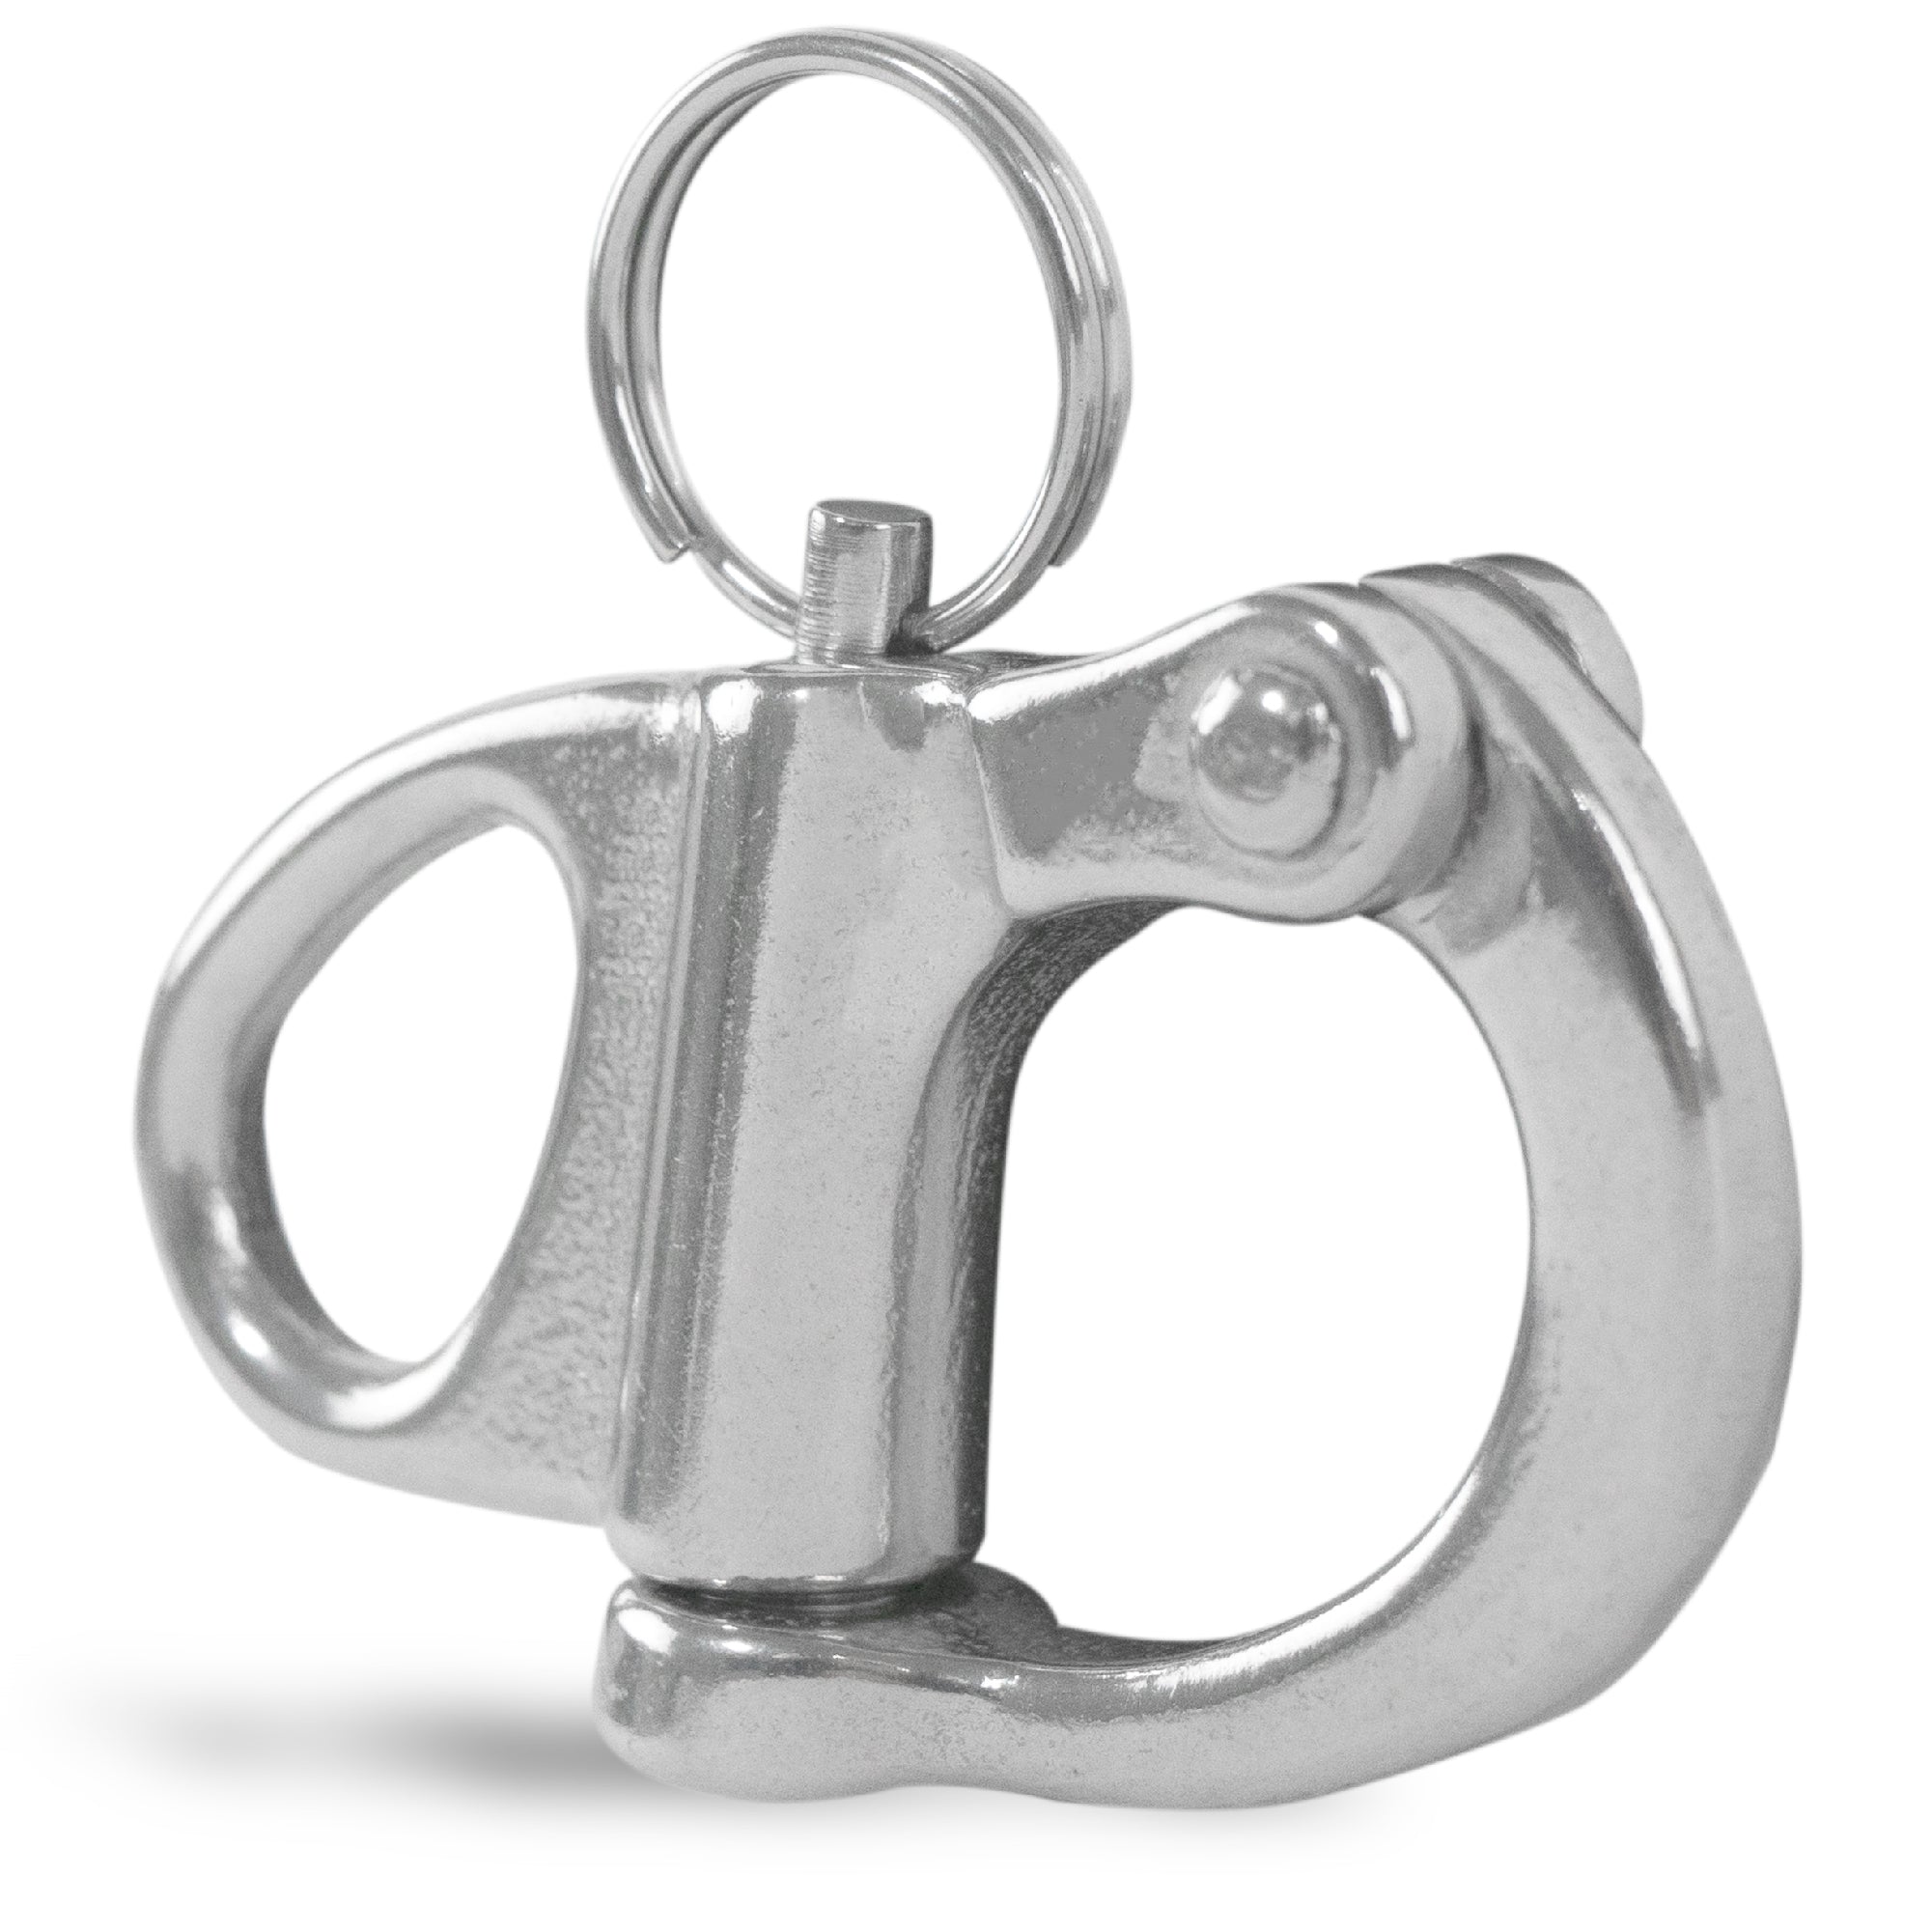 Fixed Bail Snap Shackle, 2" Stainless Steel - FO441